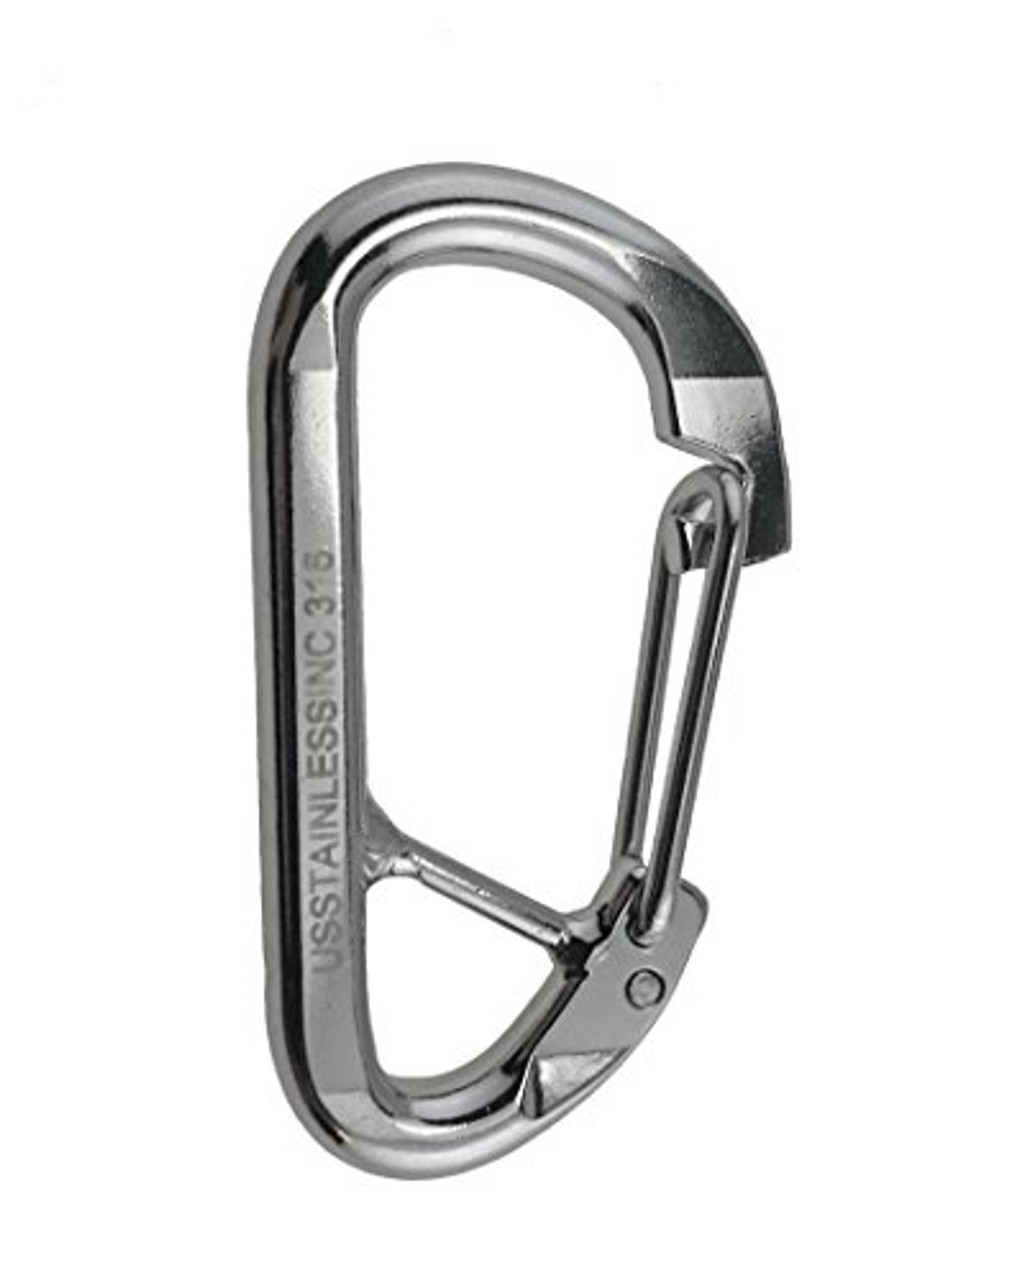 Stainless Steel 316 Spring Hook Carabiner 3/8 (10mm) Marine Grade Safety  Clip Forged - US Stainless